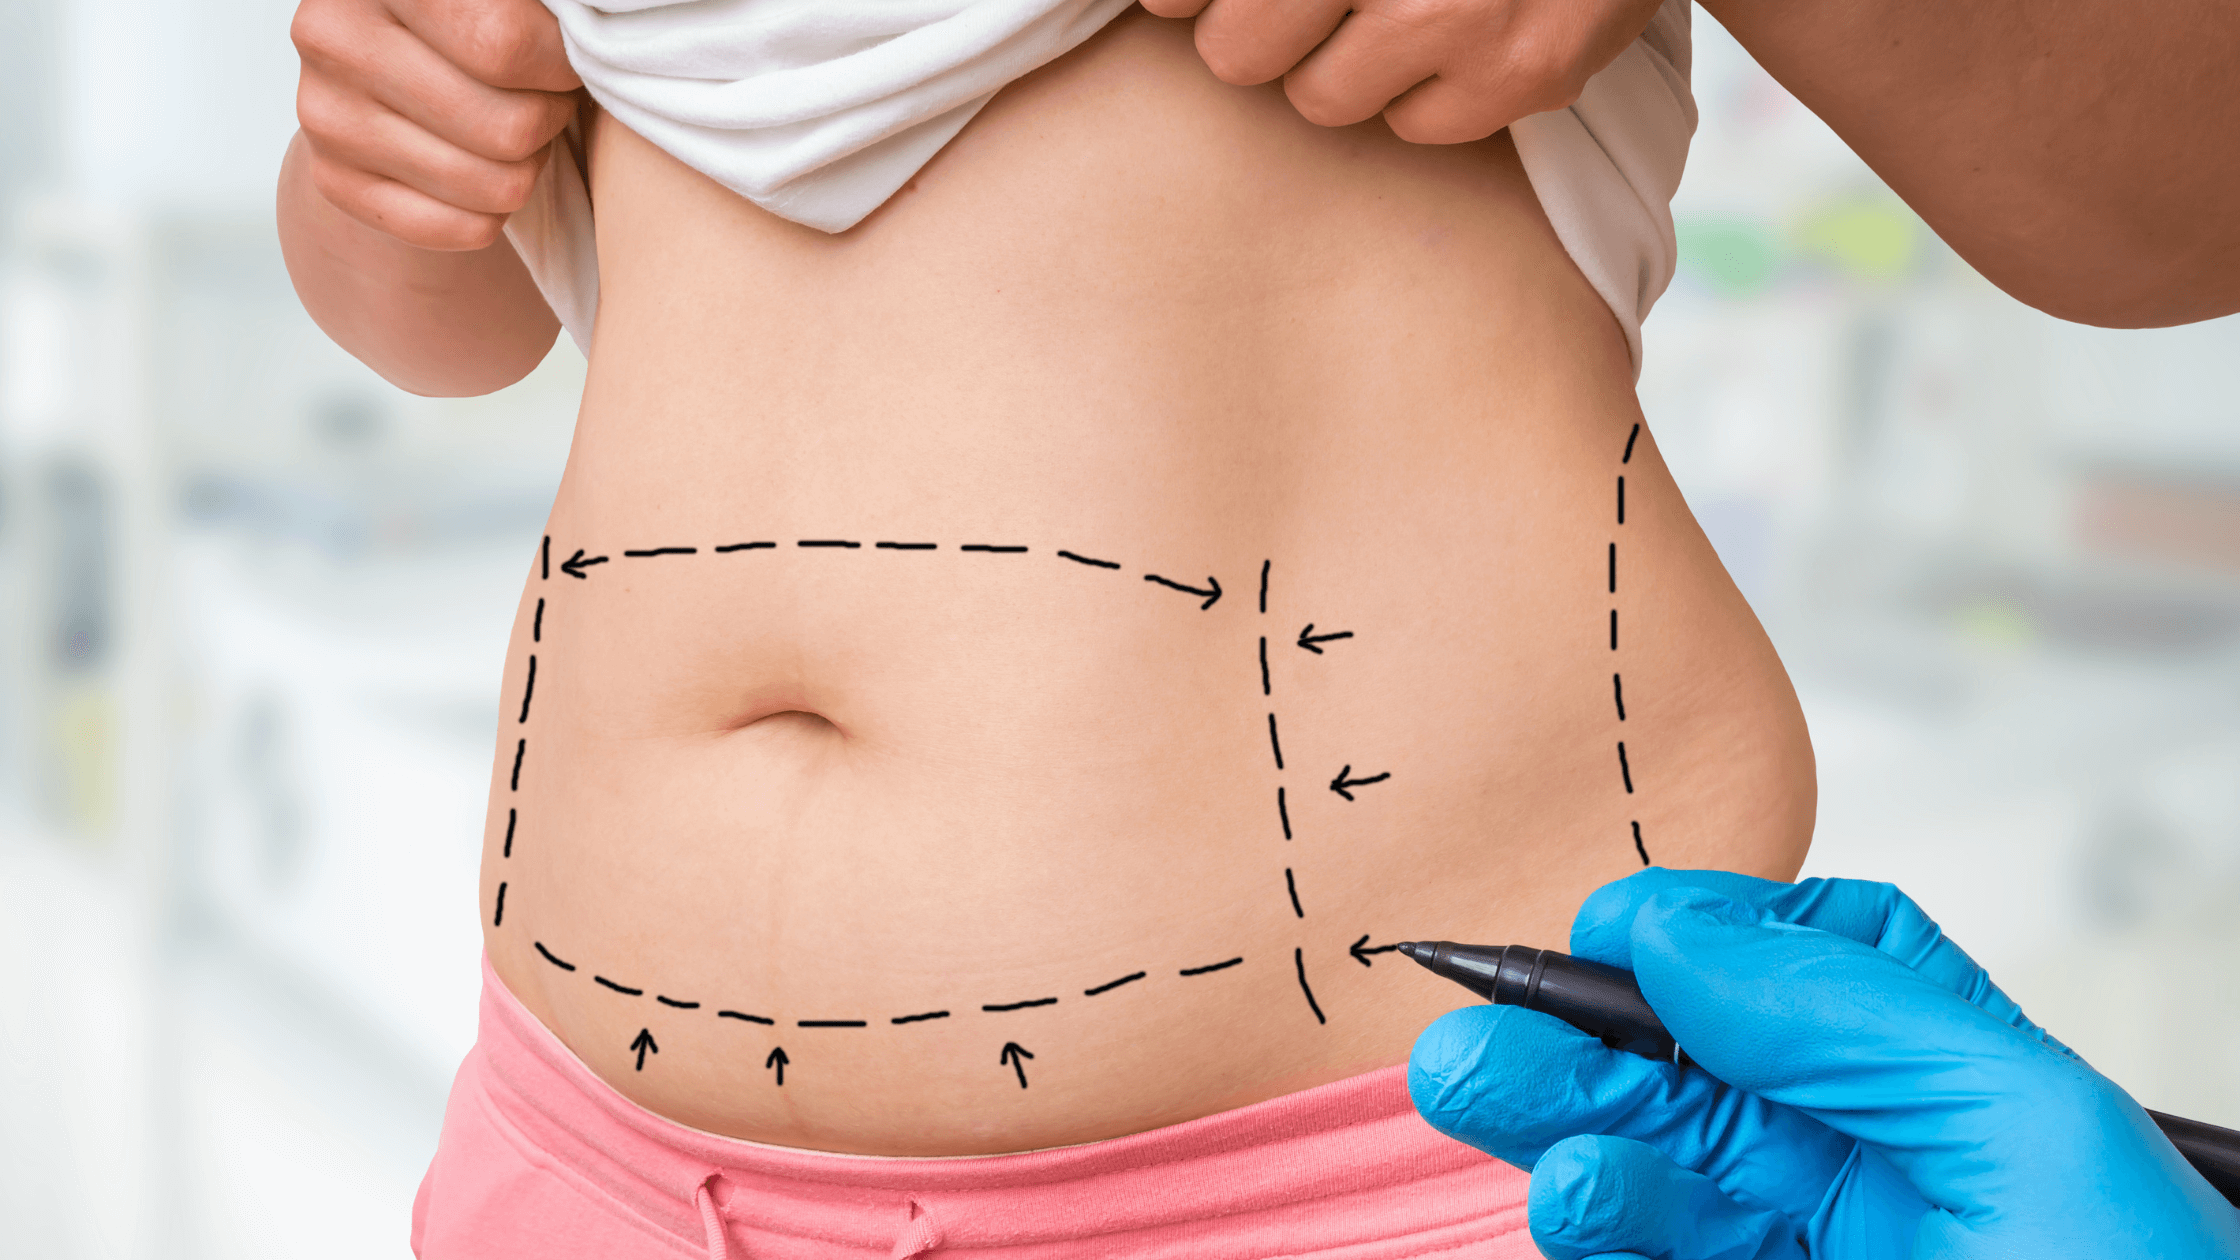 Questions To Ask When Considering a Tummy Tuck